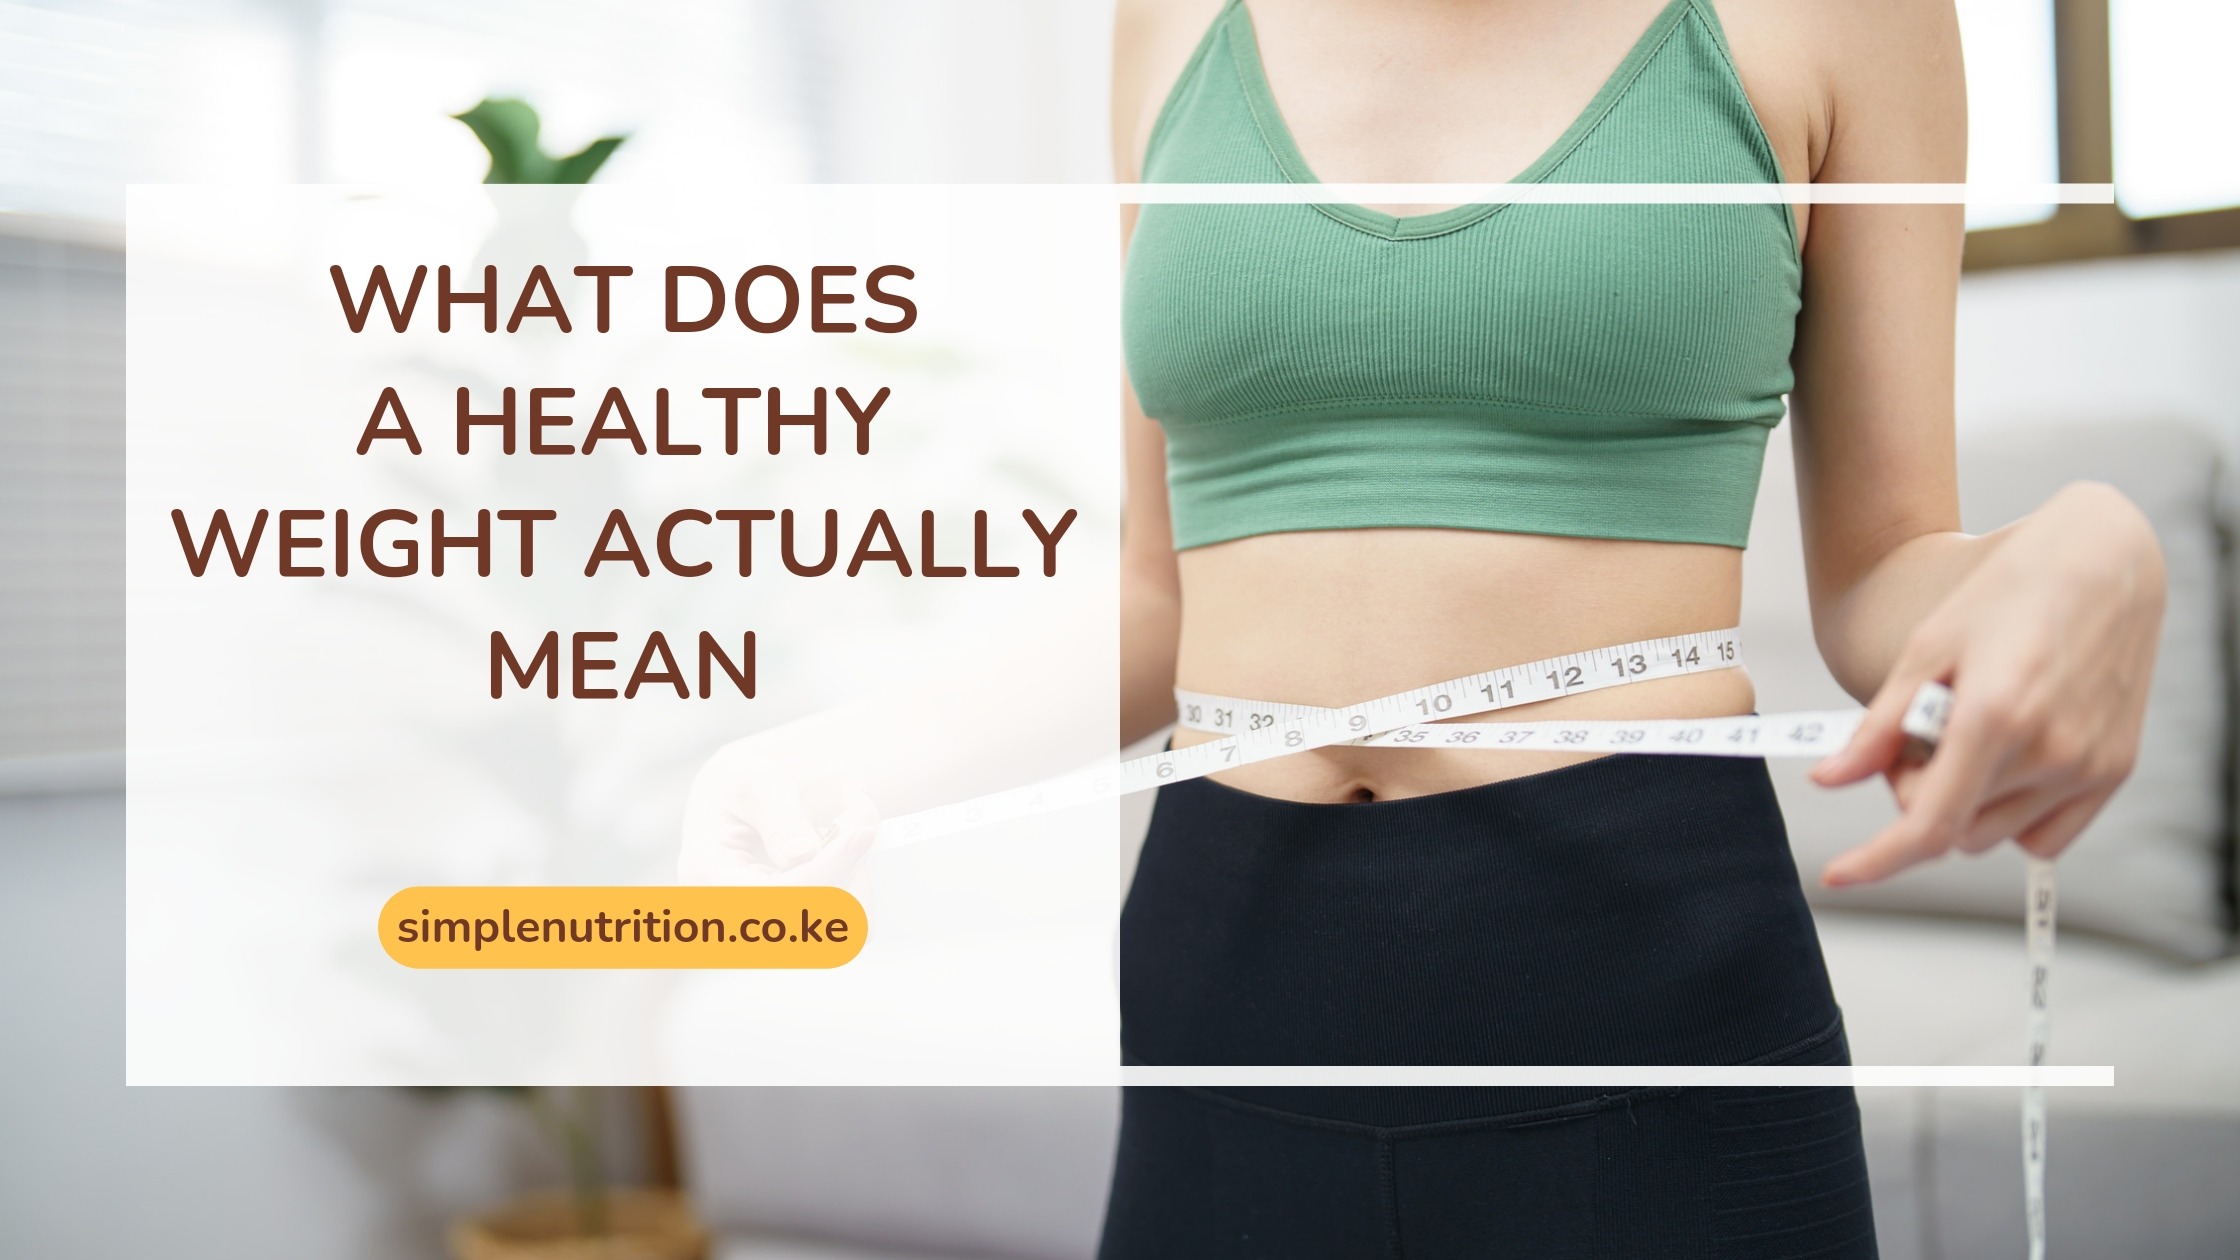 What Does a Healthy Weight Actually Mean